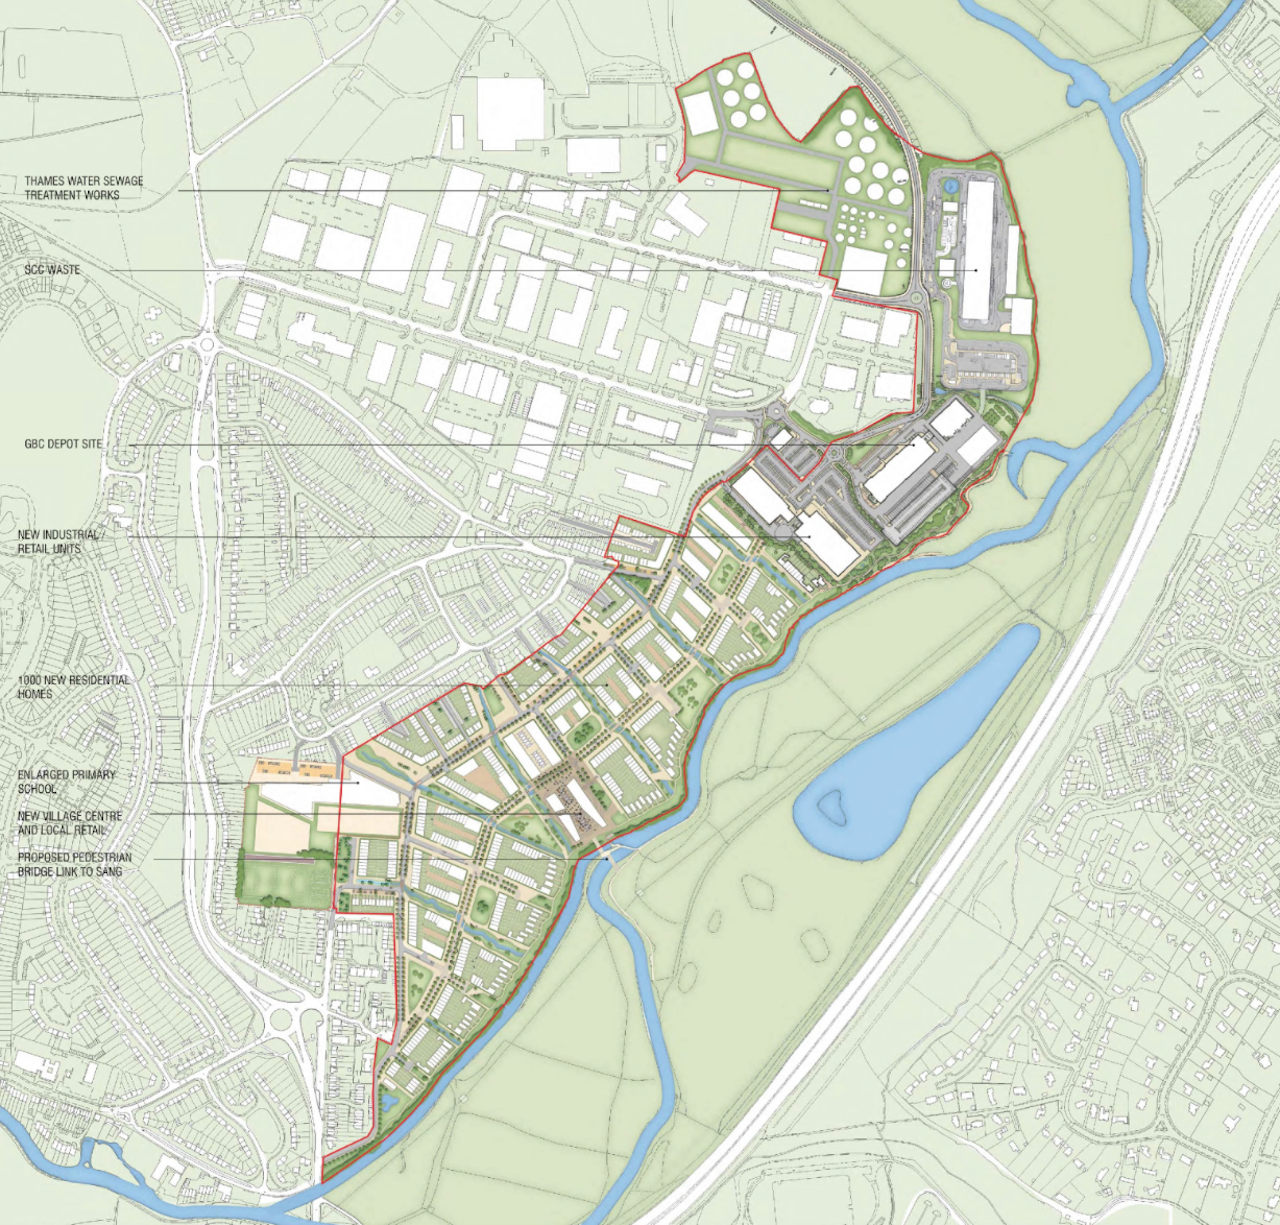 An image on Guildford Borough Council's website on what the development may look like. http://www2.guildford.gov.uk/councilmeetings/documents/s1332/Item%2006%202%20SARP%20-%20App%202%20-%20Indicative%20Plan%20of%20SARP%20layout%20on%20completion%20of%20development.pdf Click on image to enlarge in a new window.